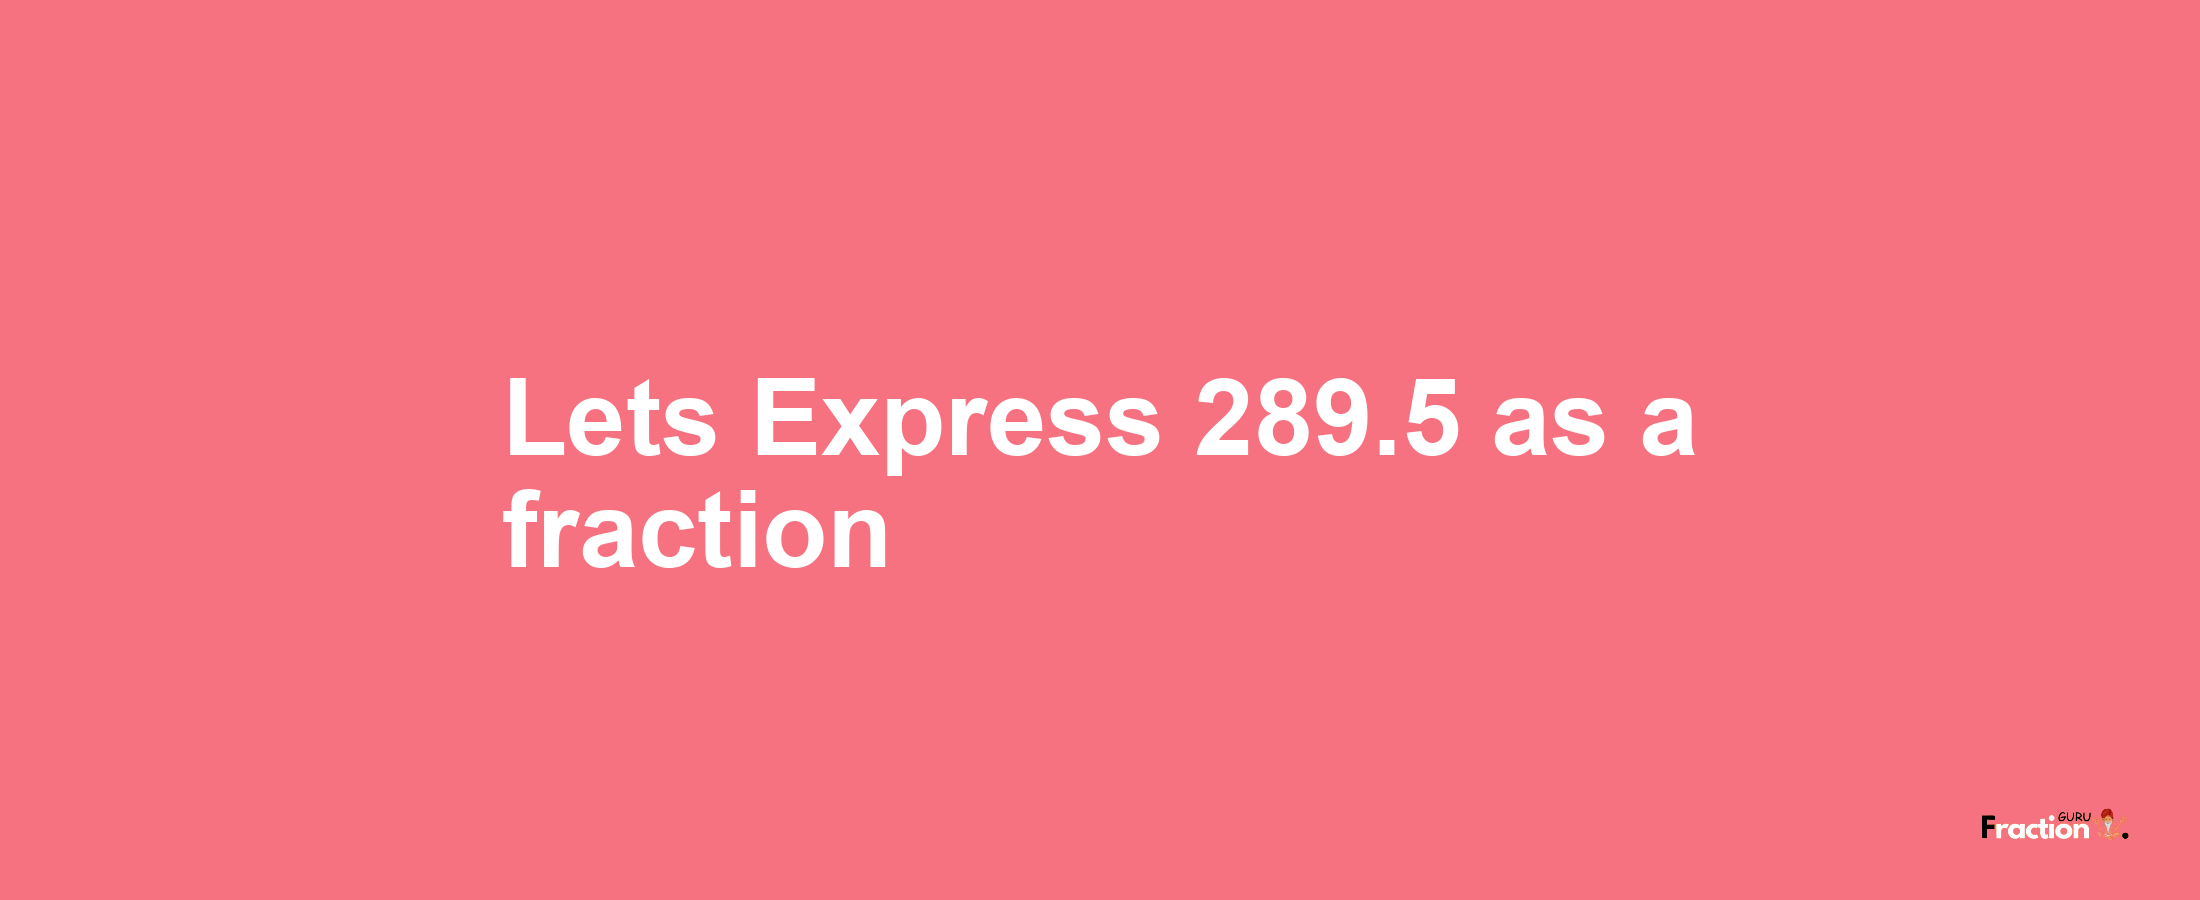 Lets Express 289.5 as afraction